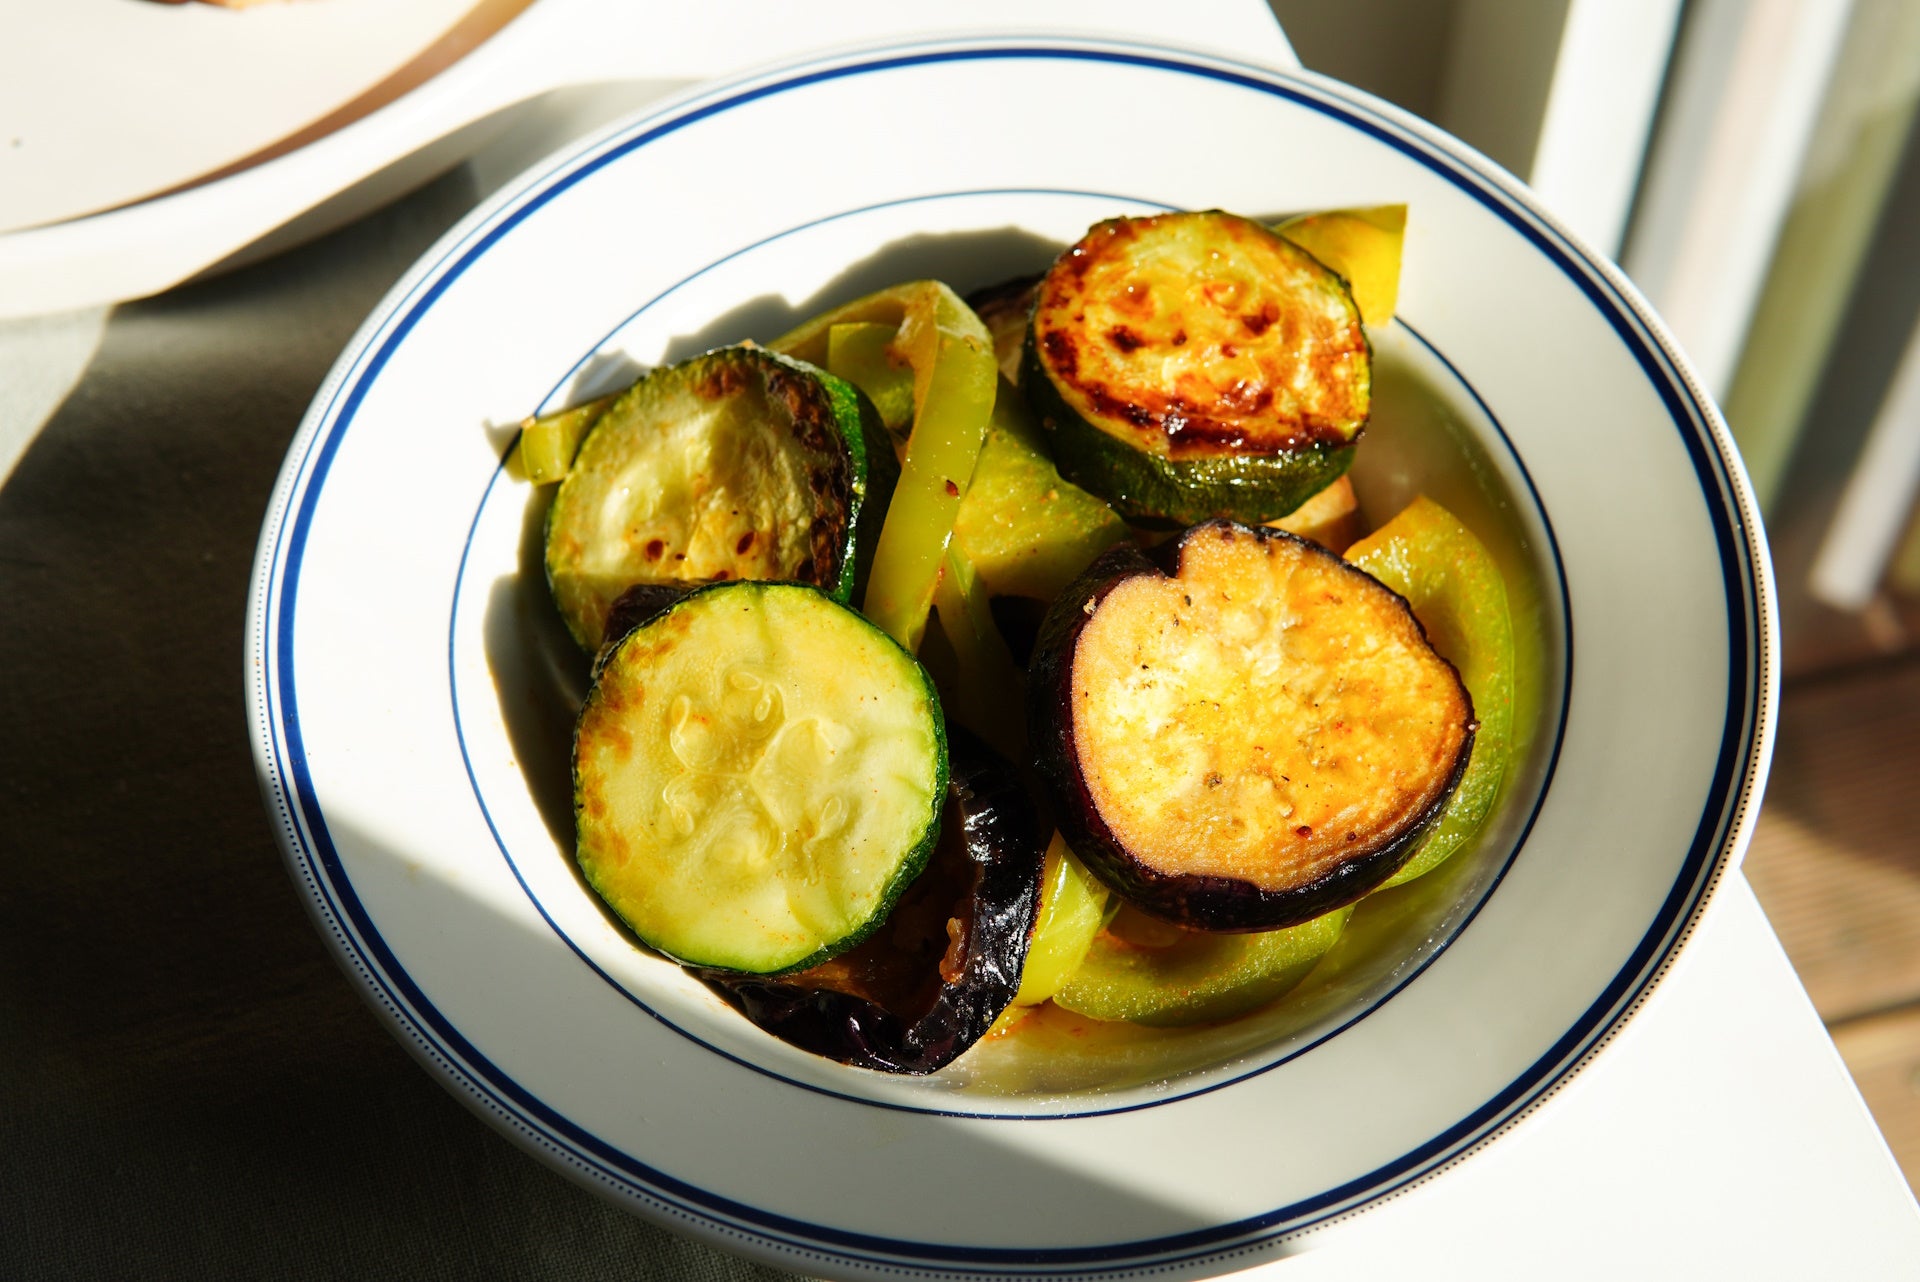 Grilled vegetables marinated in rich olive oil, a flavorful culinary delight.